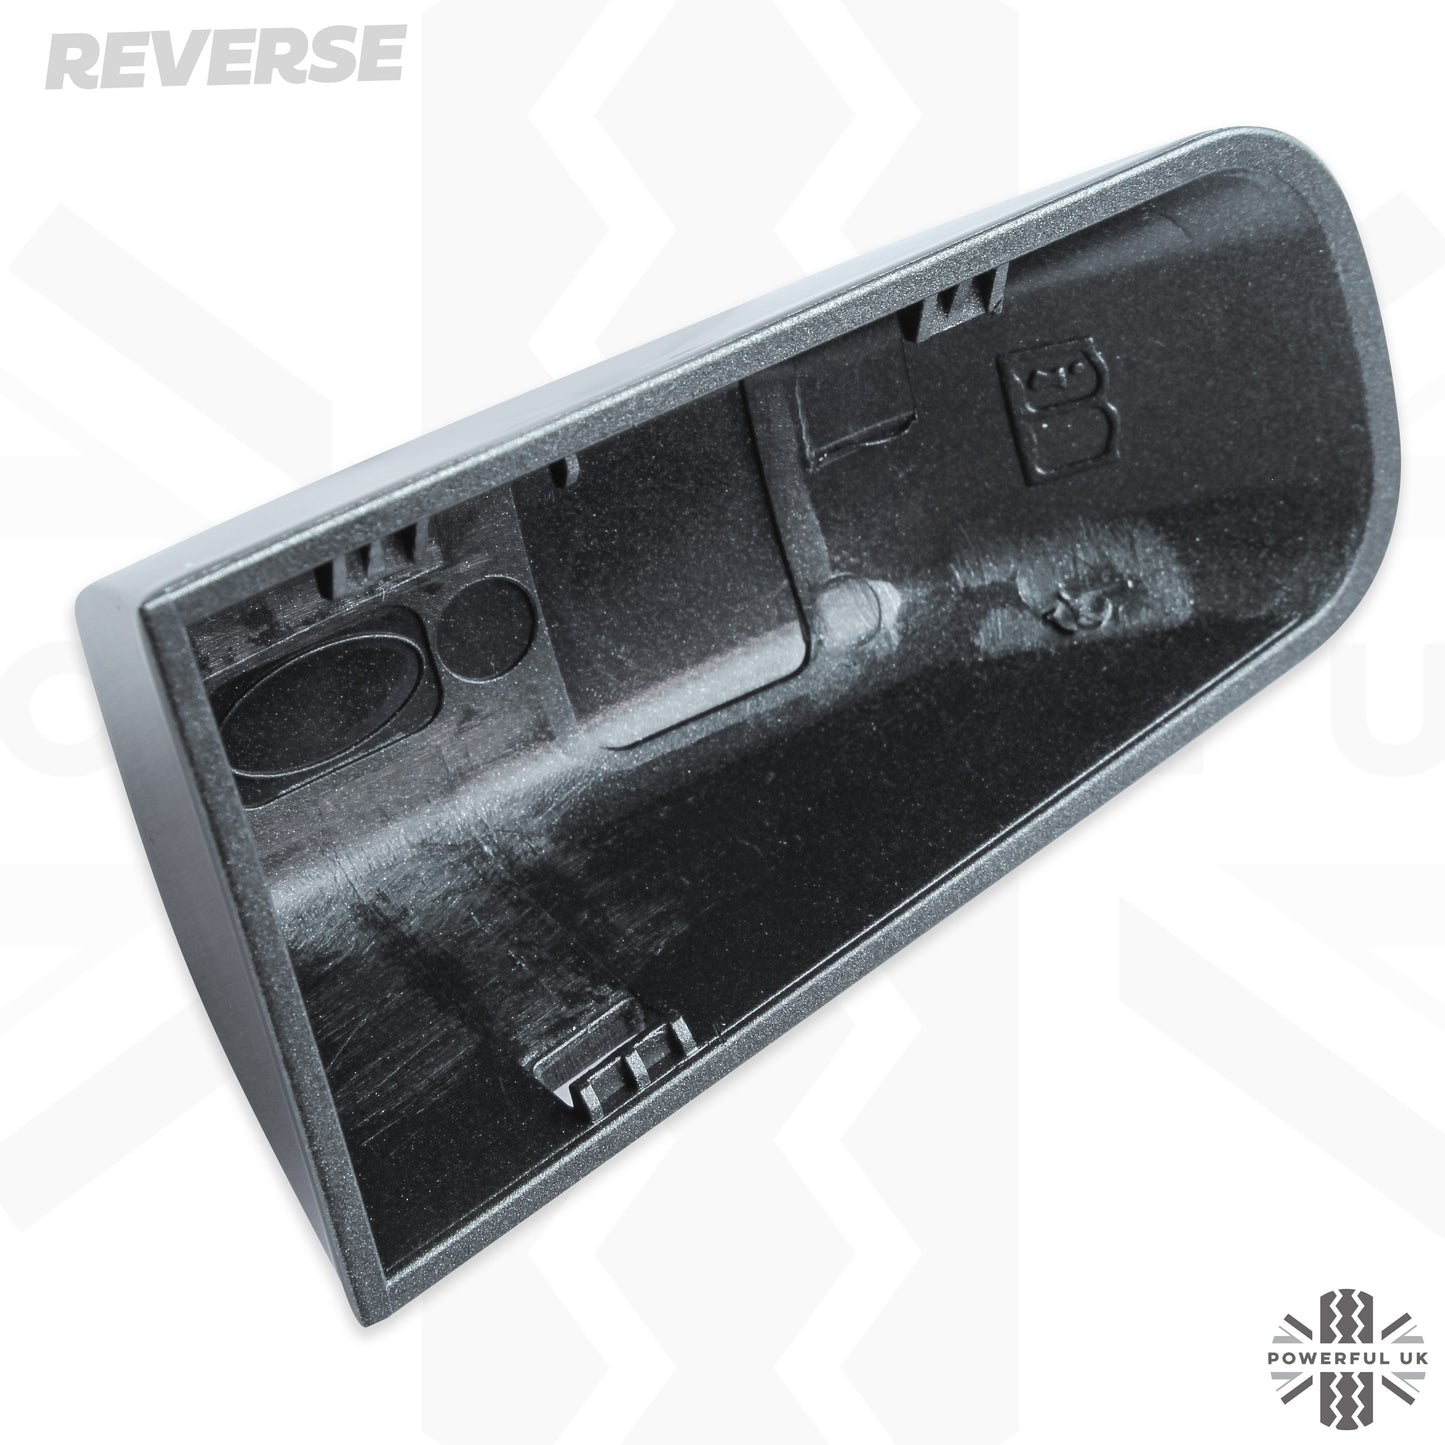 RIGHT Door Handle Key Piece for Land Rover Discovery 5 - Indus Silver